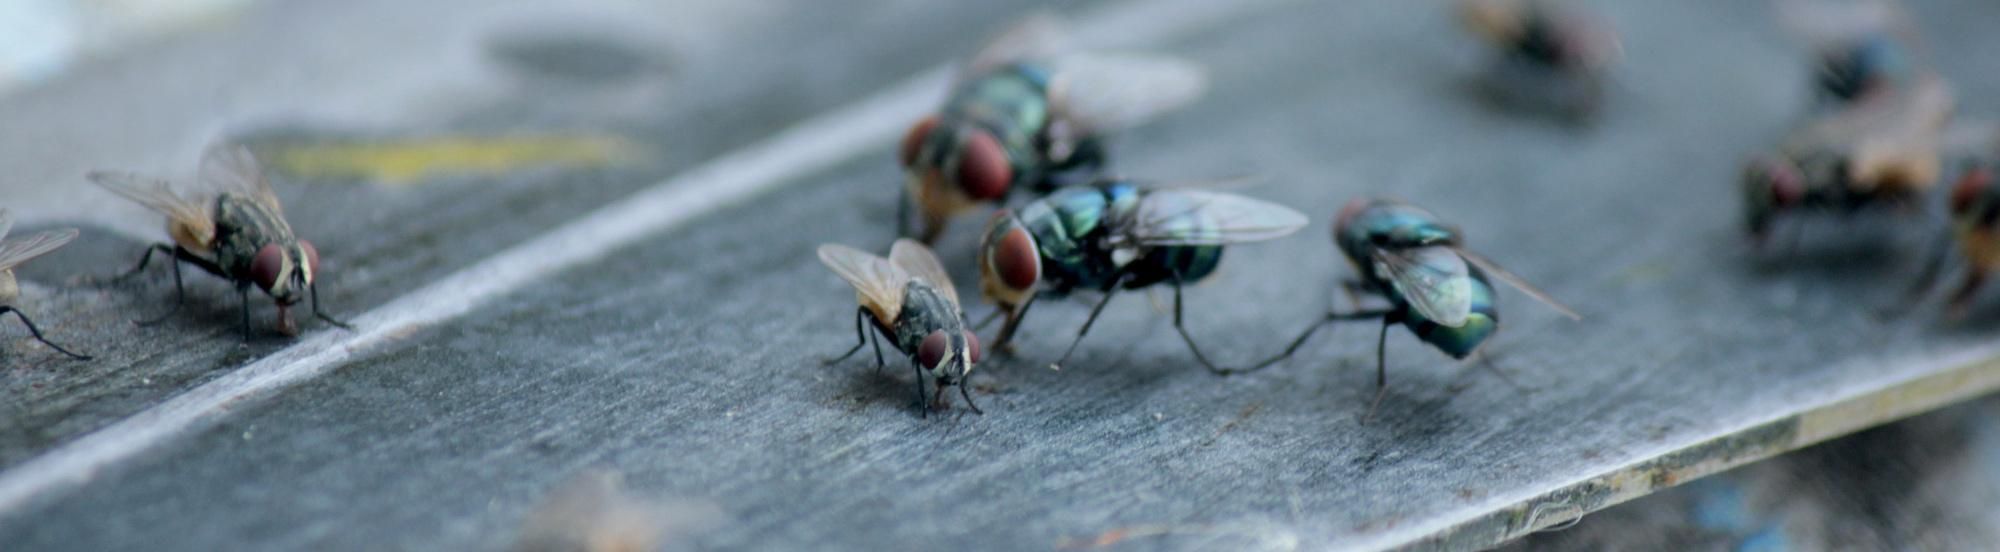 house flies resting on surface